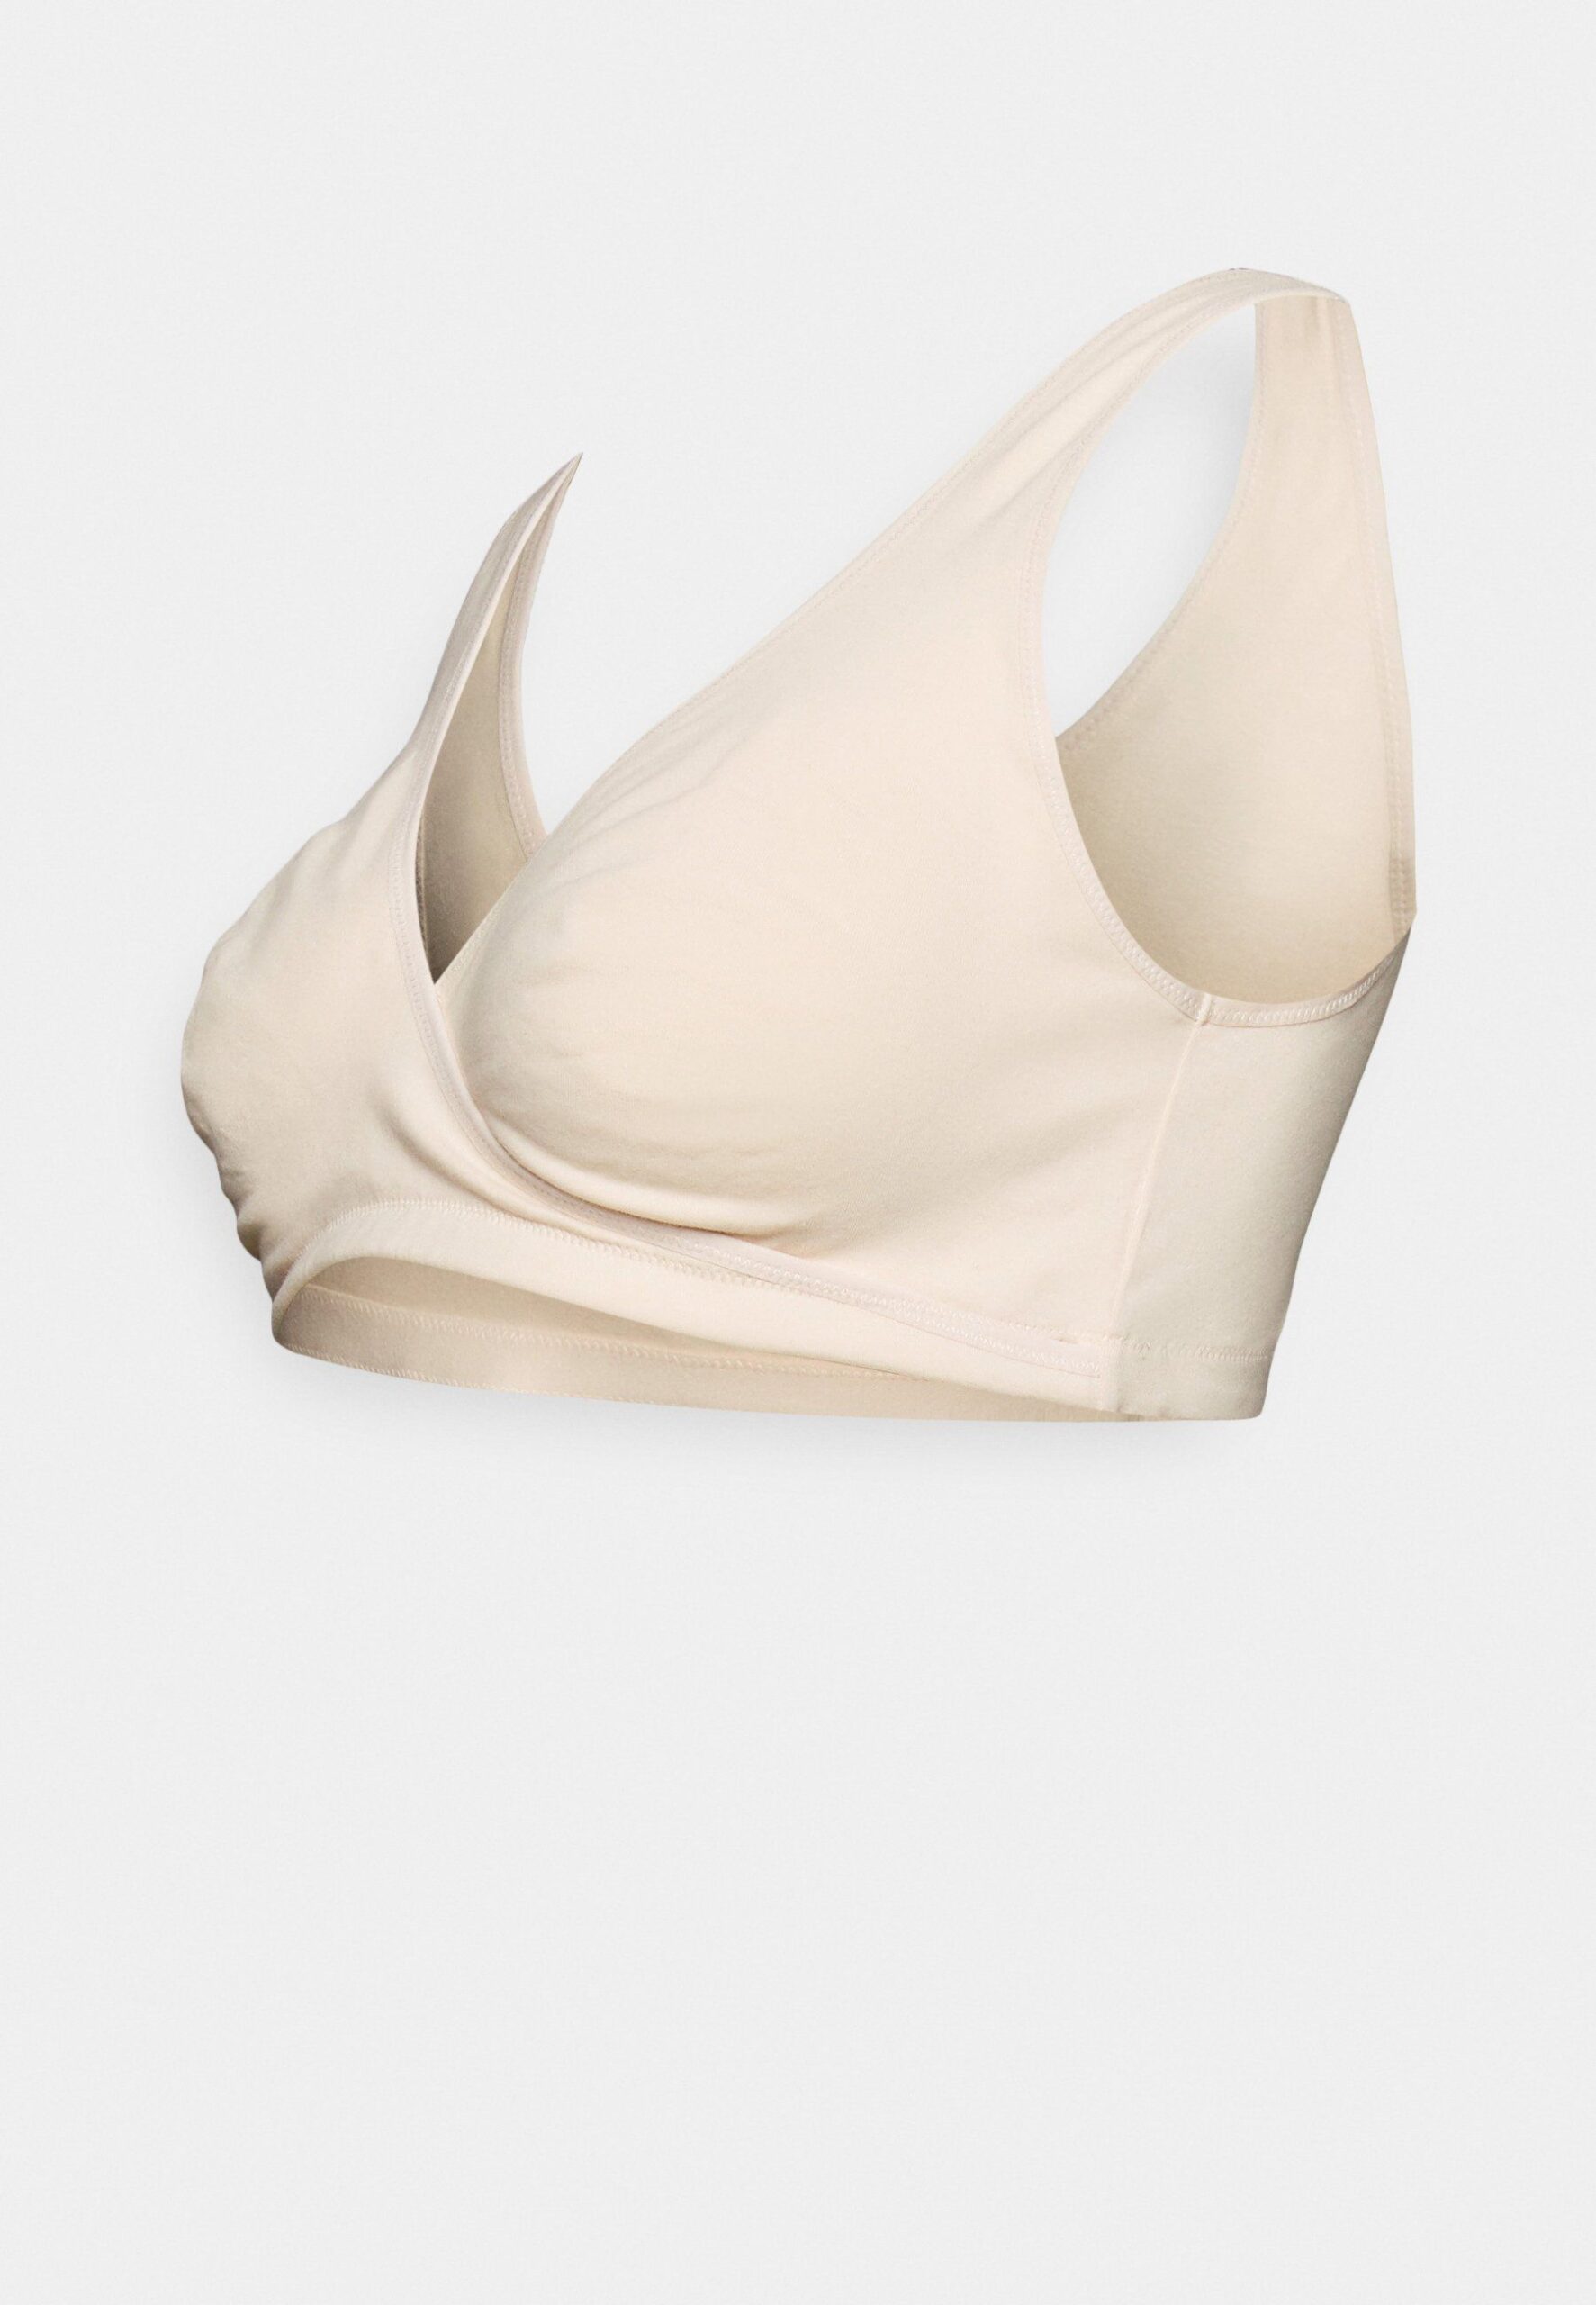 Nursing Bra: Comfort and Convenience for New Moms